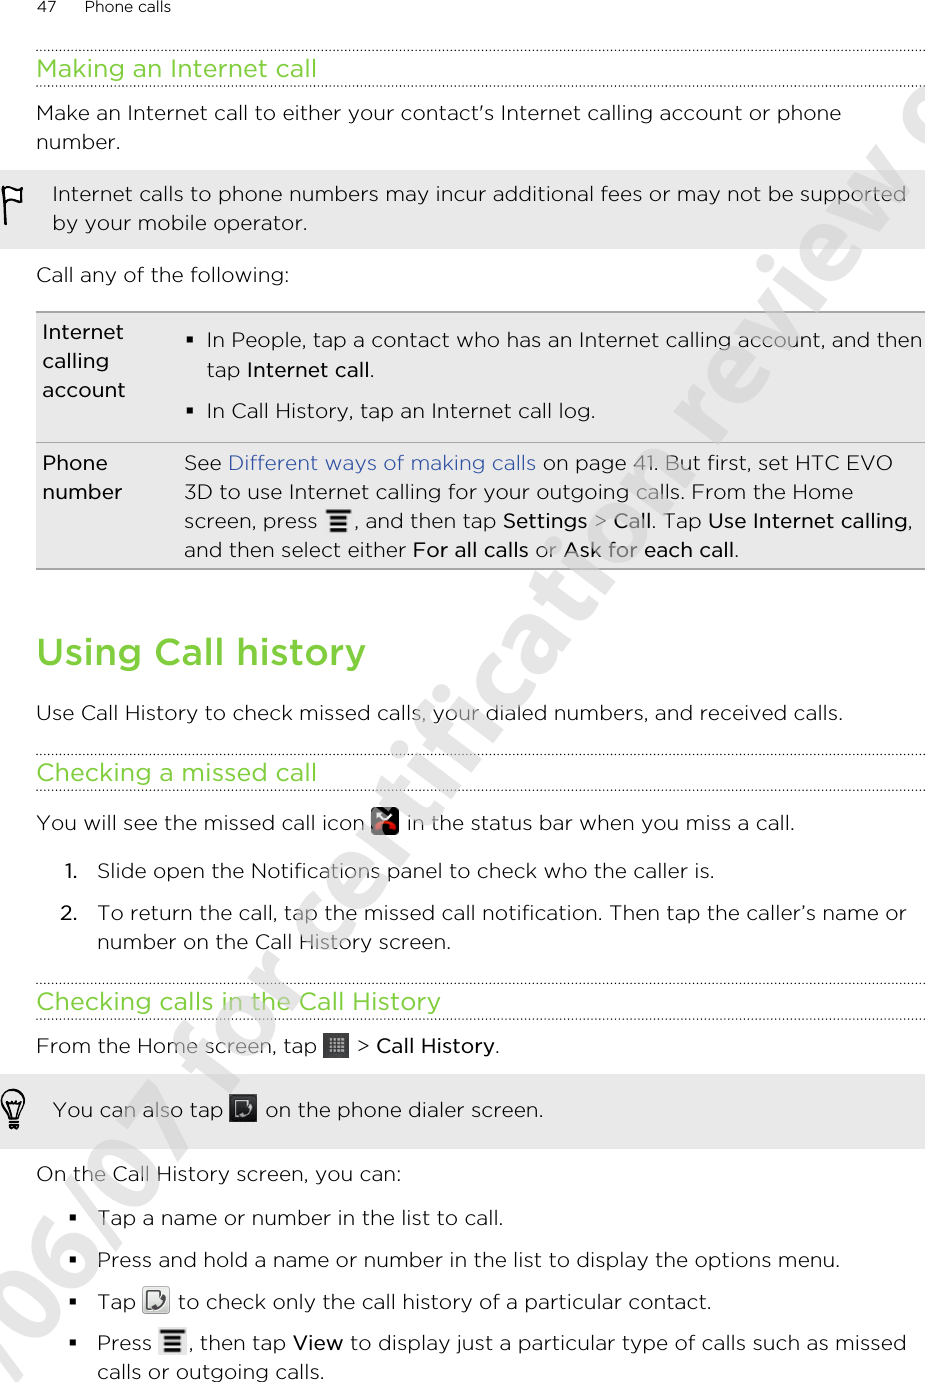 Making an Internet callMake an Internet call to either your contact&apos;s Internet calling account or phonenumber.Internet calls to phone numbers may incur additional fees or may not be supportedby your mobile operator.Call any of the following:Internetcallingaccount§In People, tap a contact who has an Internet calling account, and thentap Internet call.§In Call History, tap an Internet call log.PhonenumberSee Different ways of making calls on page 41. But first, set HTC EVO3D to use Internet calling for your outgoing calls. From the Homescreen, press  , and then tap Settings &gt; Call. Tap Use Internet calling,and then select either For all calls or Ask for each call.Using Call historyUse Call History to check missed calls, your dialed numbers, and received calls.Checking a missed callYou will see the missed call icon   in the status bar when you miss a call.1. Slide open the Notifications panel to check who the caller is.2. To return the call, tap the missed call notification. Then tap the caller’s name ornumber on the Call History screen.Checking calls in the Call HistoryFrom the Home screen, tap   &gt; Call History. You can also tap   on the phone dialer screen.On the Call History screen, you can:§Tap a name or number in the list to call.§Press and hold a name or number in the list to display the options menu.§Tap   to check only the call history of a particular contact.§Press  , then tap View to display just a particular type of calls such as missedcalls or outgoing calls.47 Phone calls2011/06/07 for certification review only